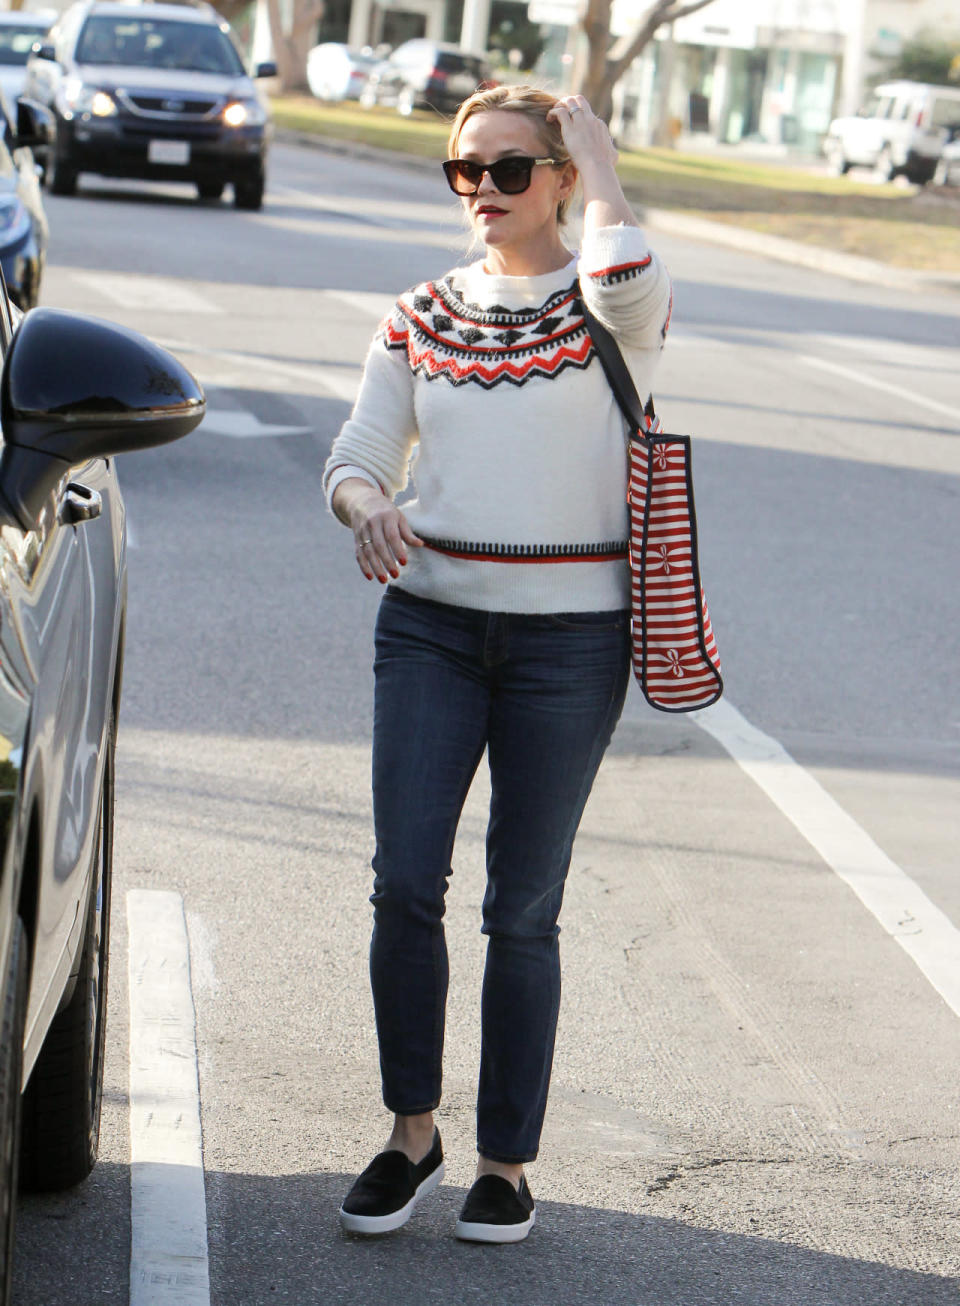 Reese Witherspoon wears a Fair Isle sweater, blue skinny jeans, and slip-ons on Dec. 13, 2015 in Los Angeles, California.